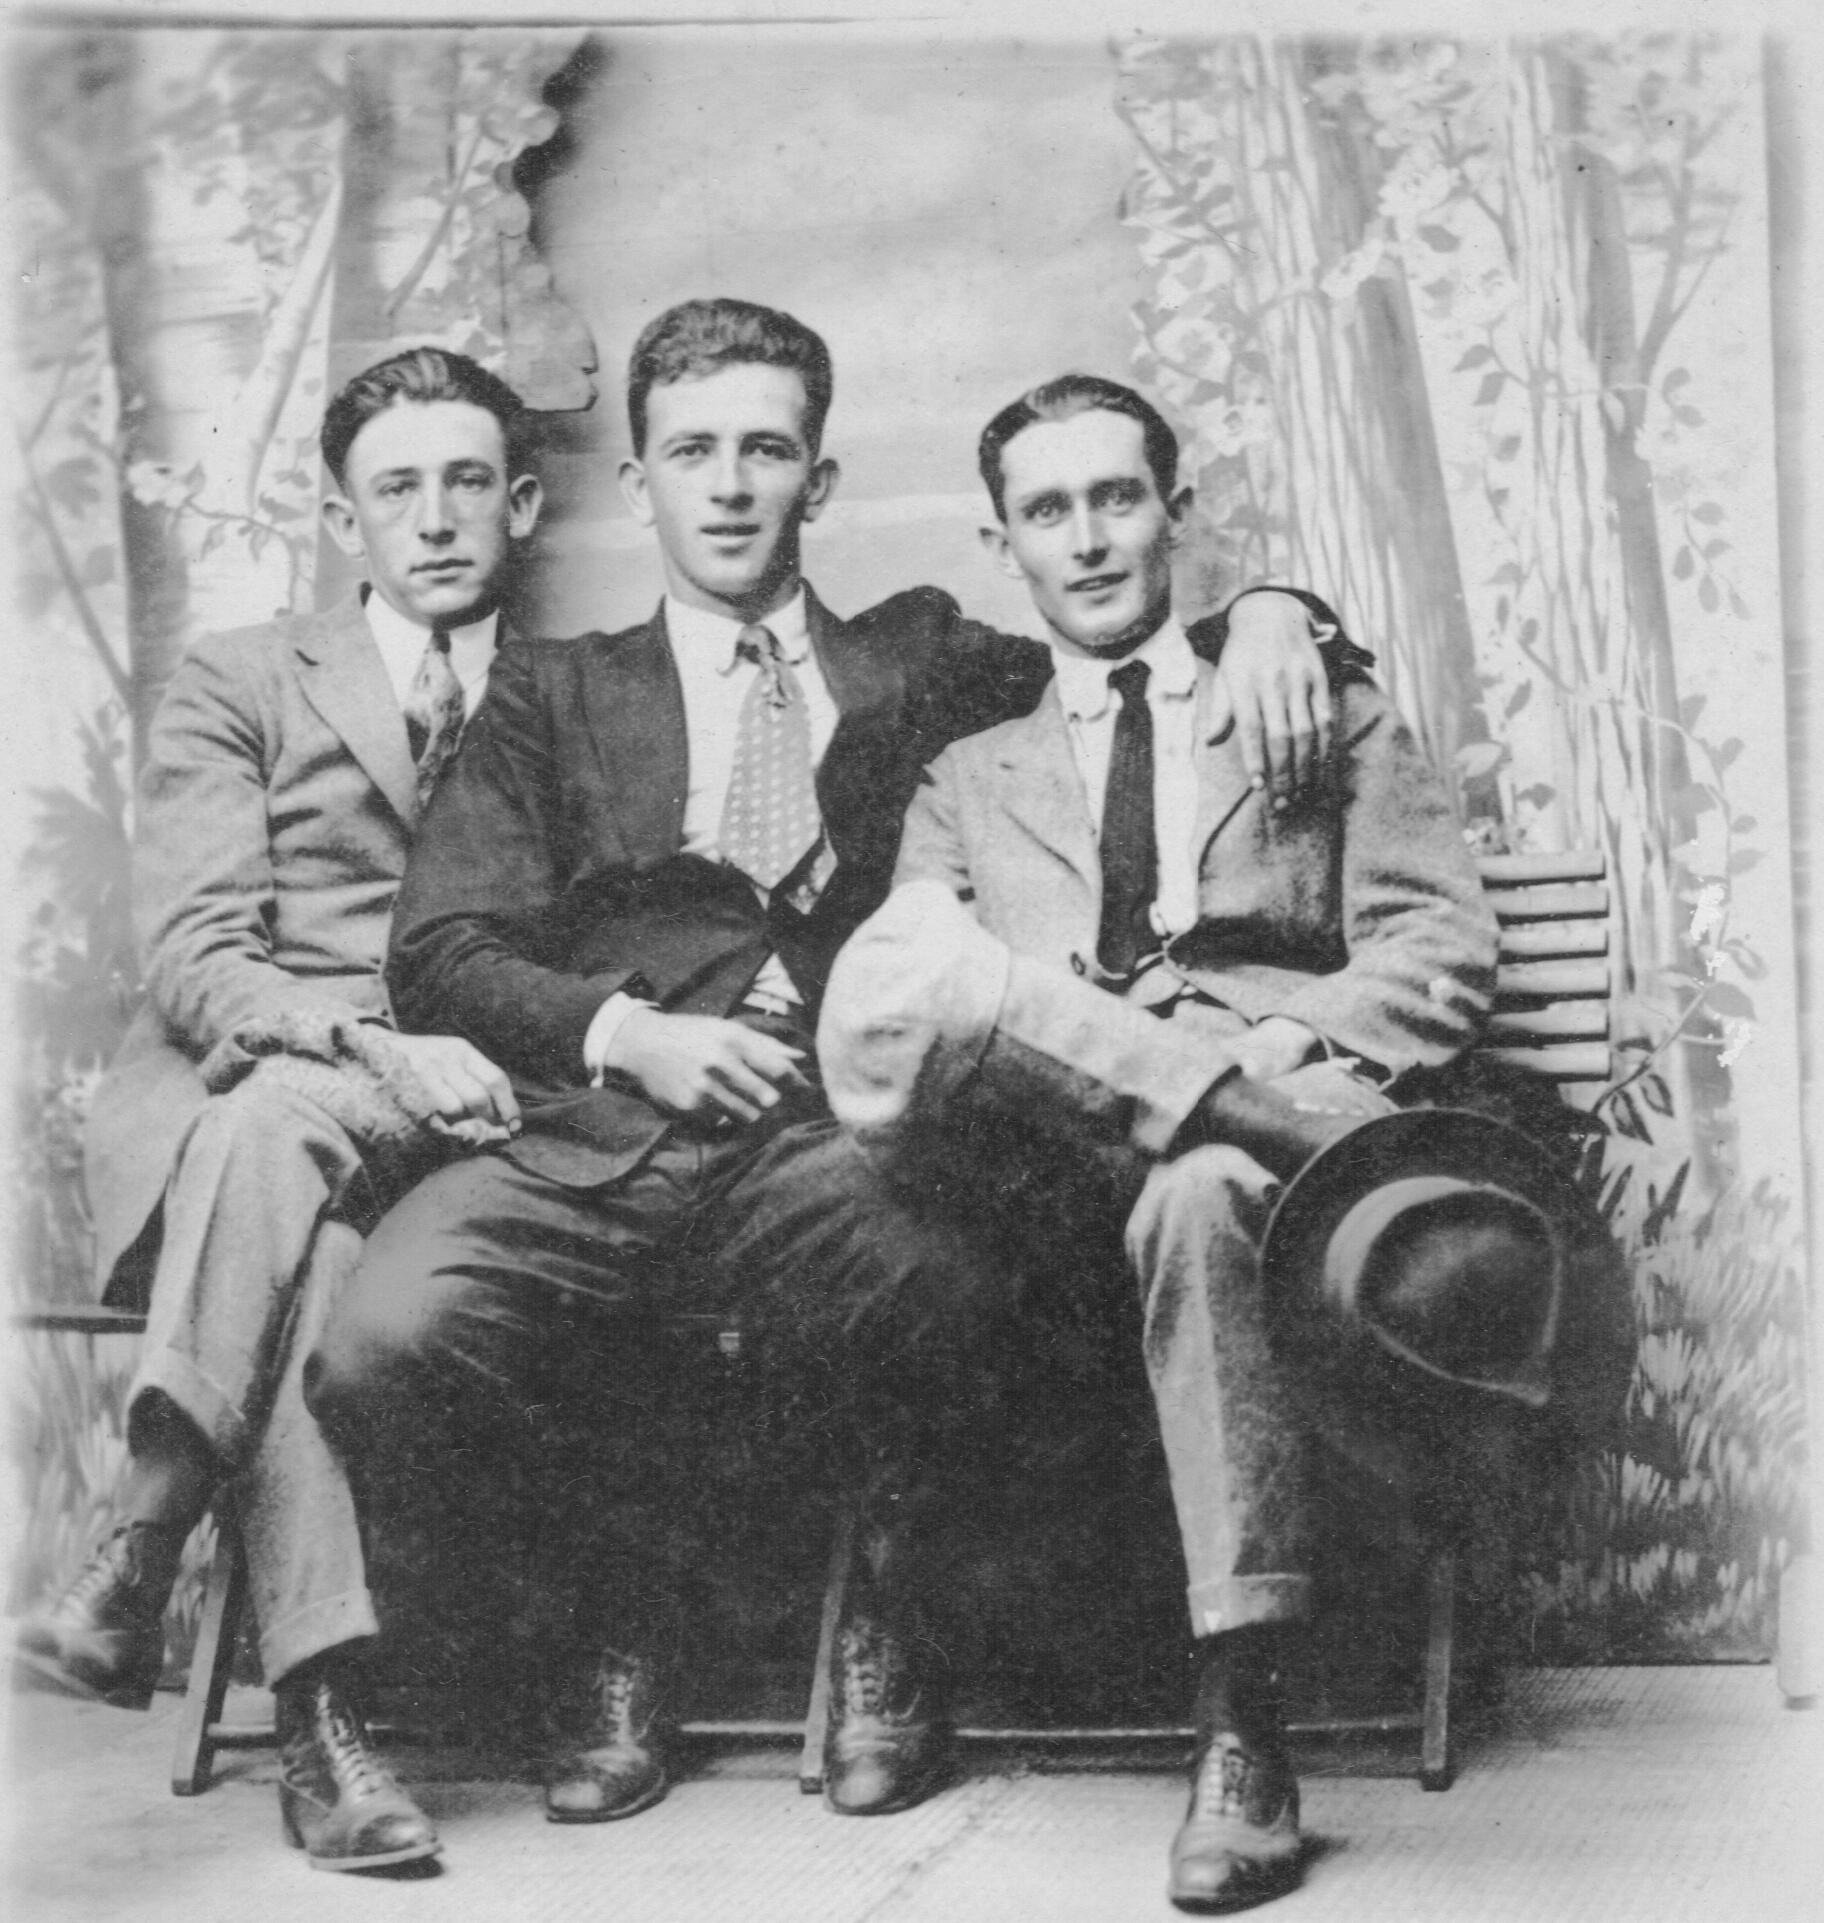 Uncle Bennie Day on the right ca early 1920s